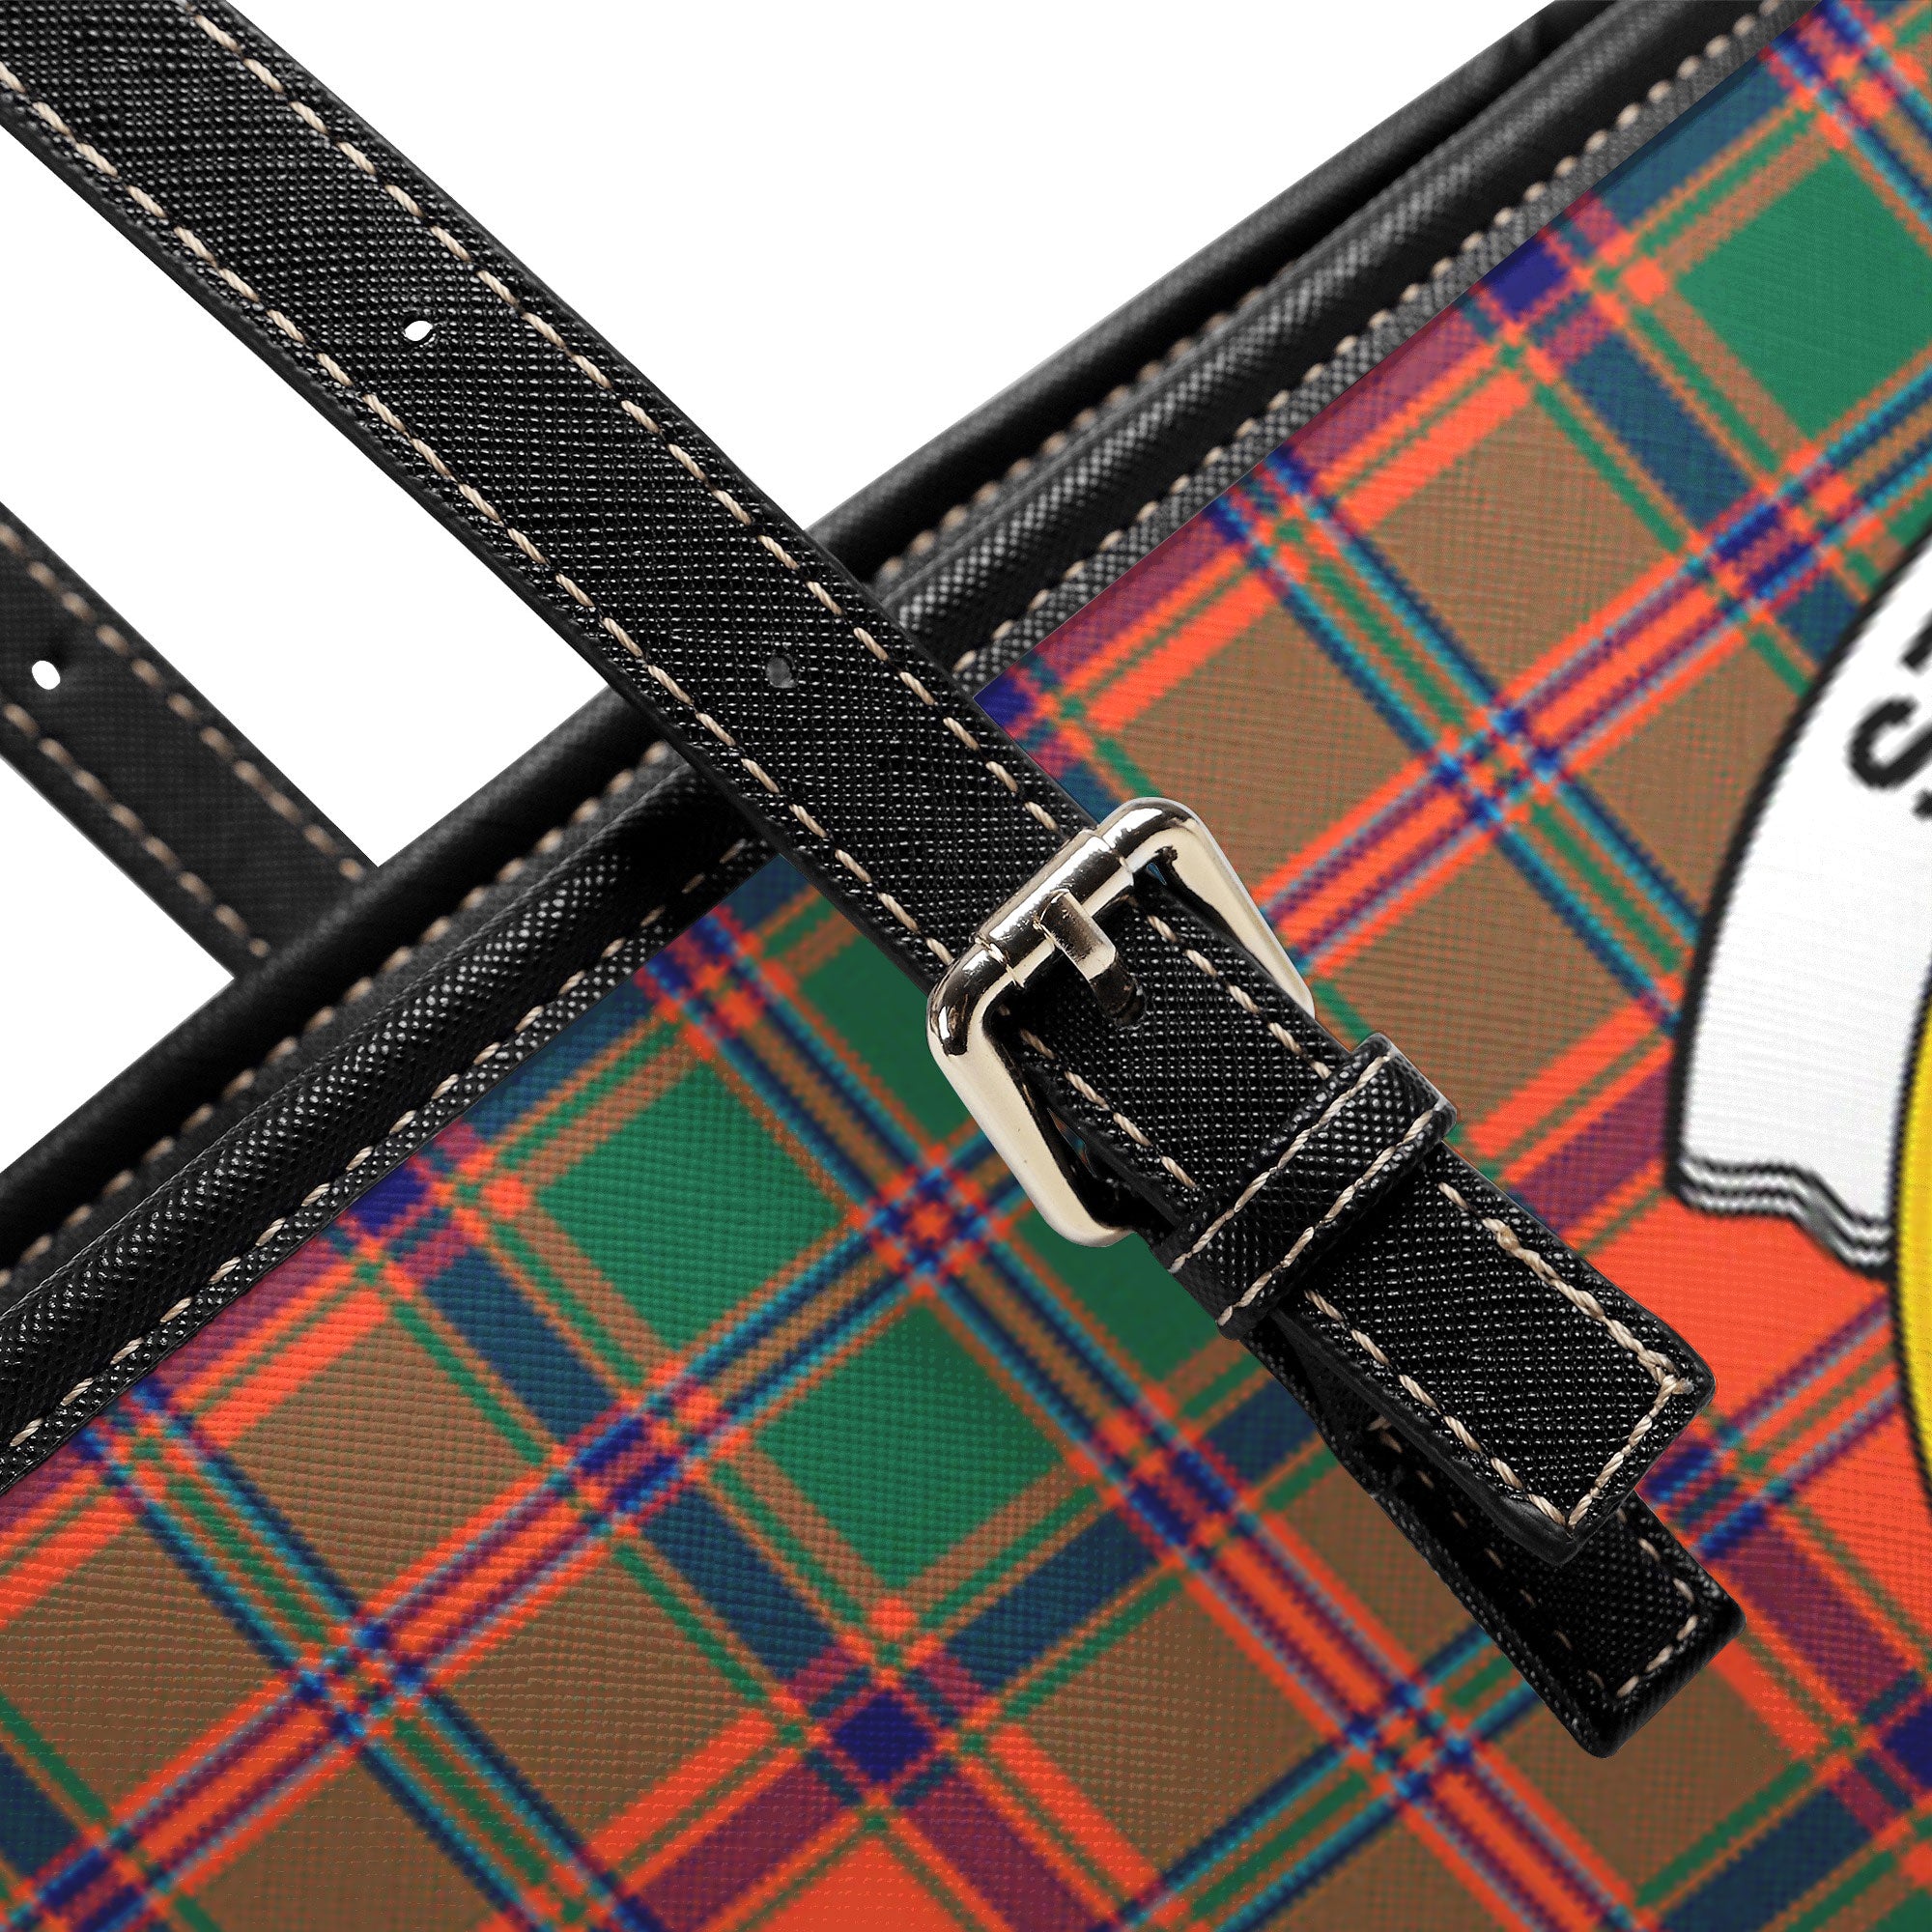 Stewart of Appin Ancient Tartan Crest Leather Tote Bag